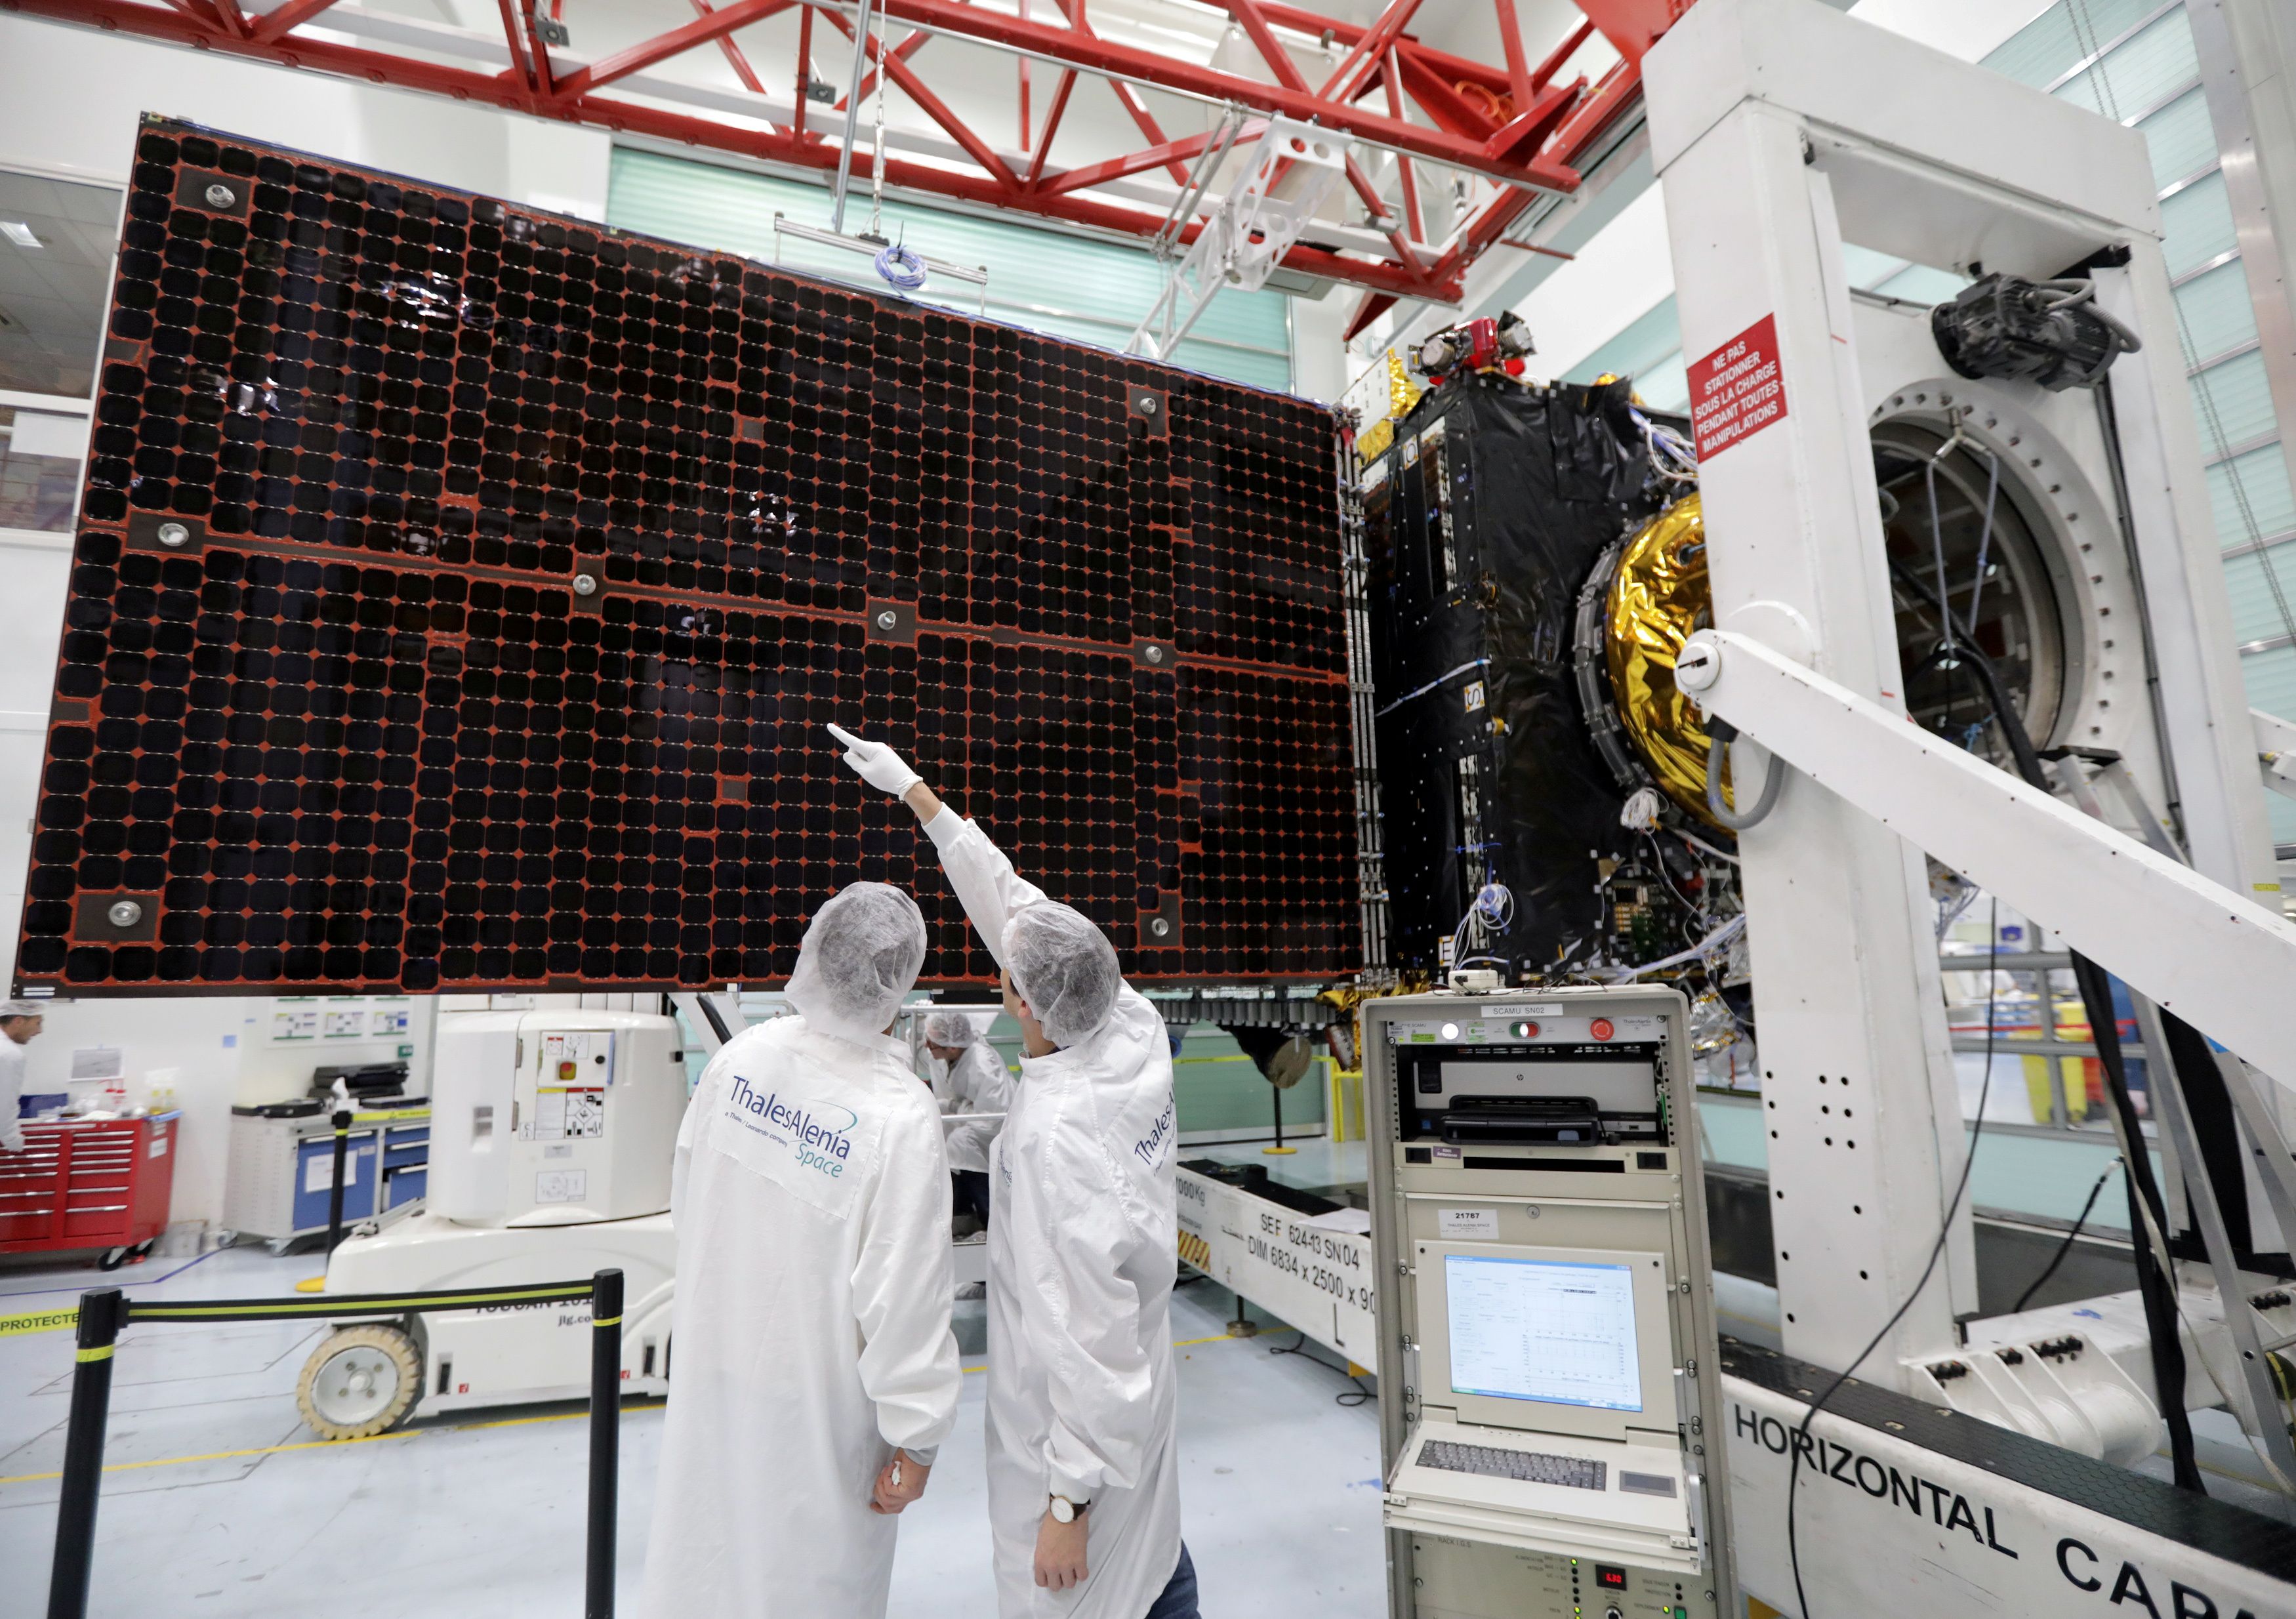 A technician looks at a solar panel on the Inmarsat S-Band/Hellas-Sat 3 satellite in the clean room facilities of the Thales Alenia Space plant in Cannes, France, February 3, 2017.   REUTERS/Eric Gaillard/File Photo